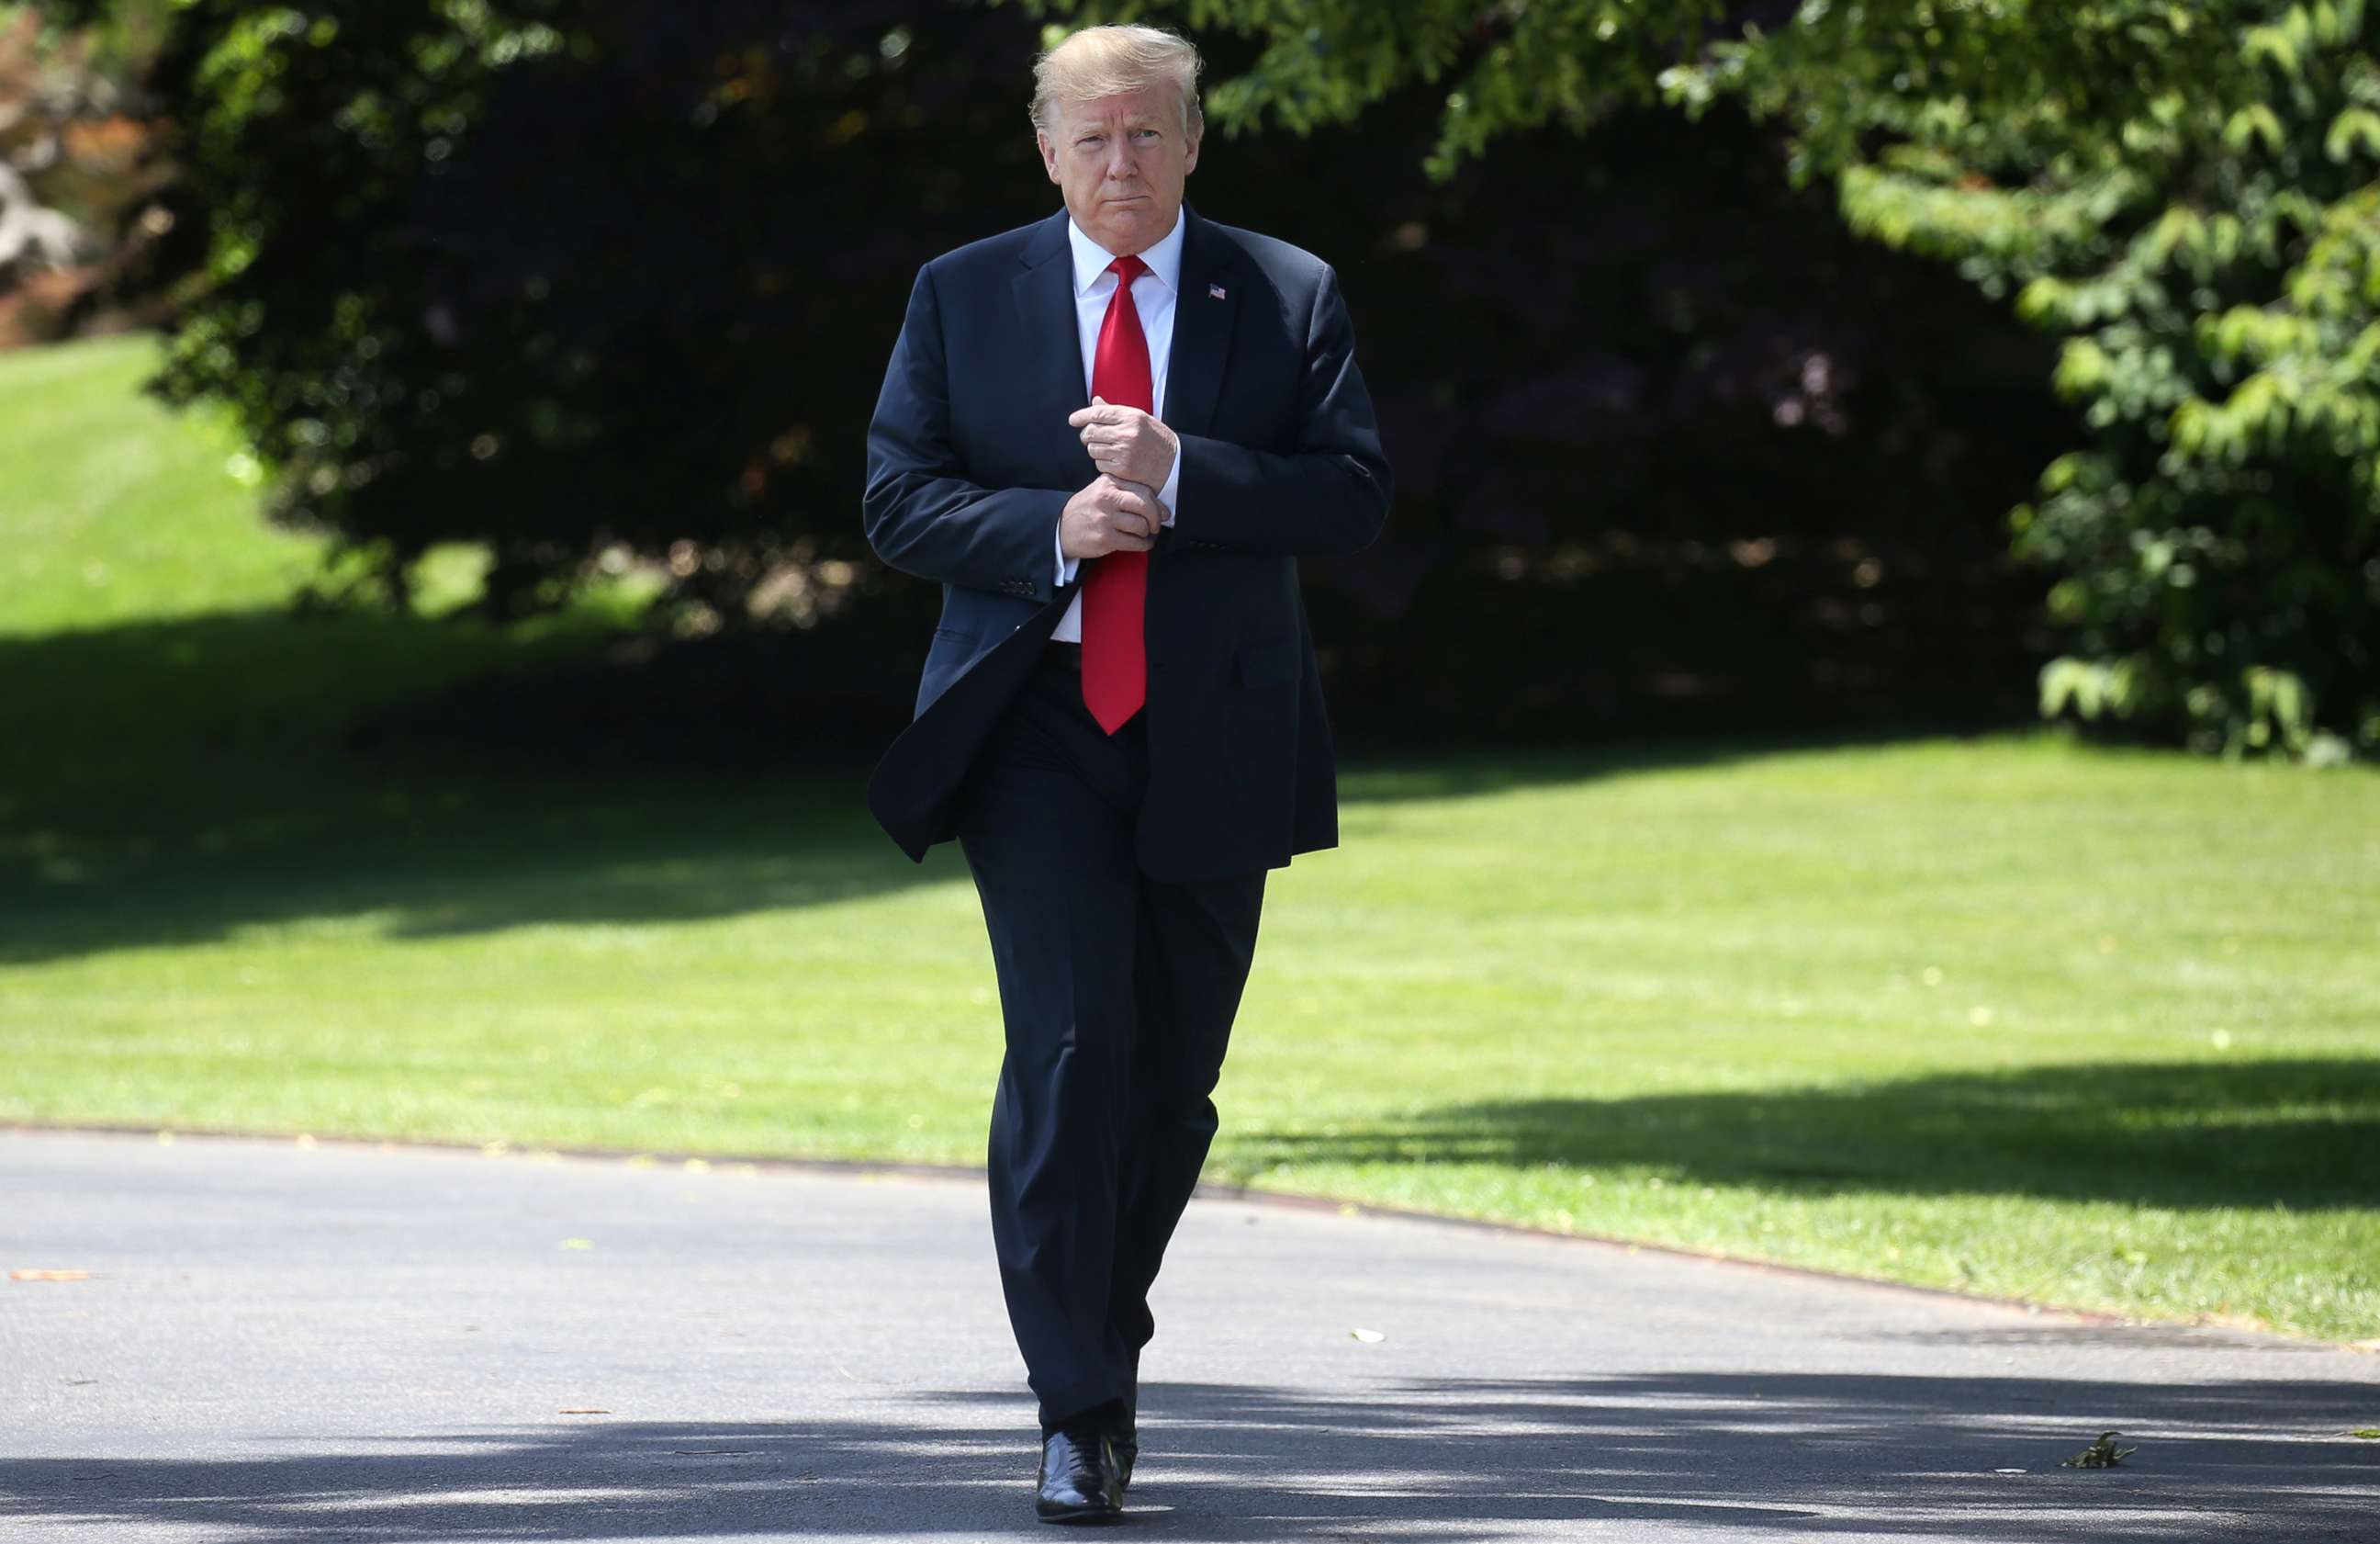 PHOTO: President Donald Trump leaves the Oval Office to speak to the news media before boarding Marine One from the South Lawn of the White House, May 24, 2019.